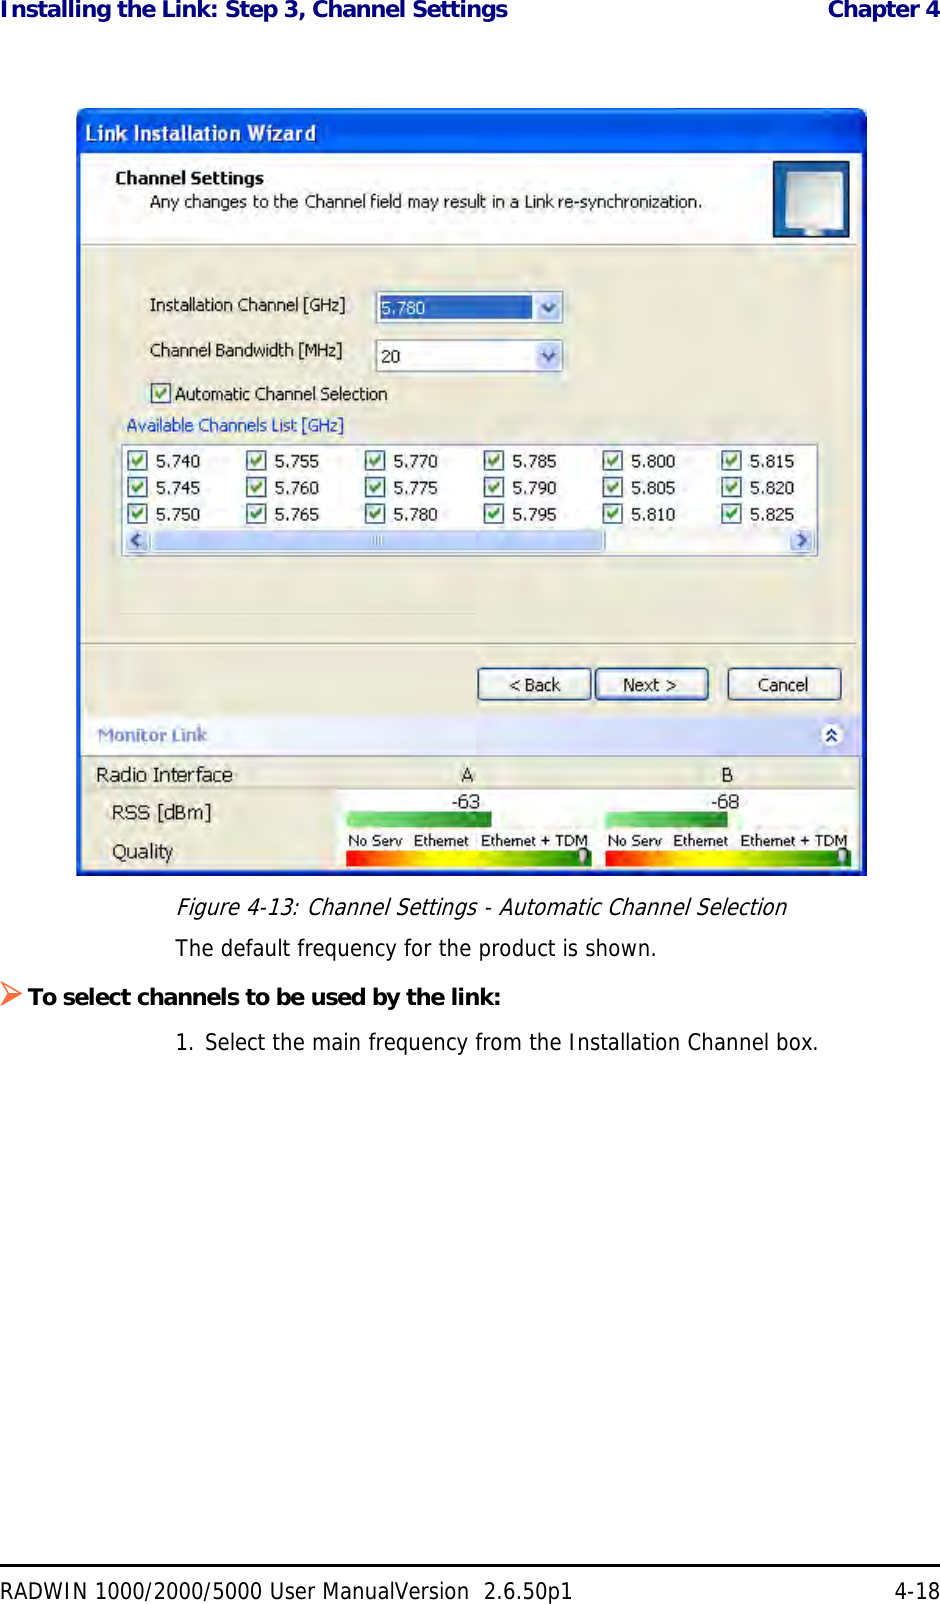 Installing the Link: Step 3, Channel Settings  Chapter 4RADWIN 1000/2000/5000 User ManualVersion  2.6.50p1 4-18Figure 4-13: Channel Settings - Automatic Channel SelectionThe default frequency for the product is shown.To select channels to be used by the link:1. Select the main frequency from the Installation Channel box.